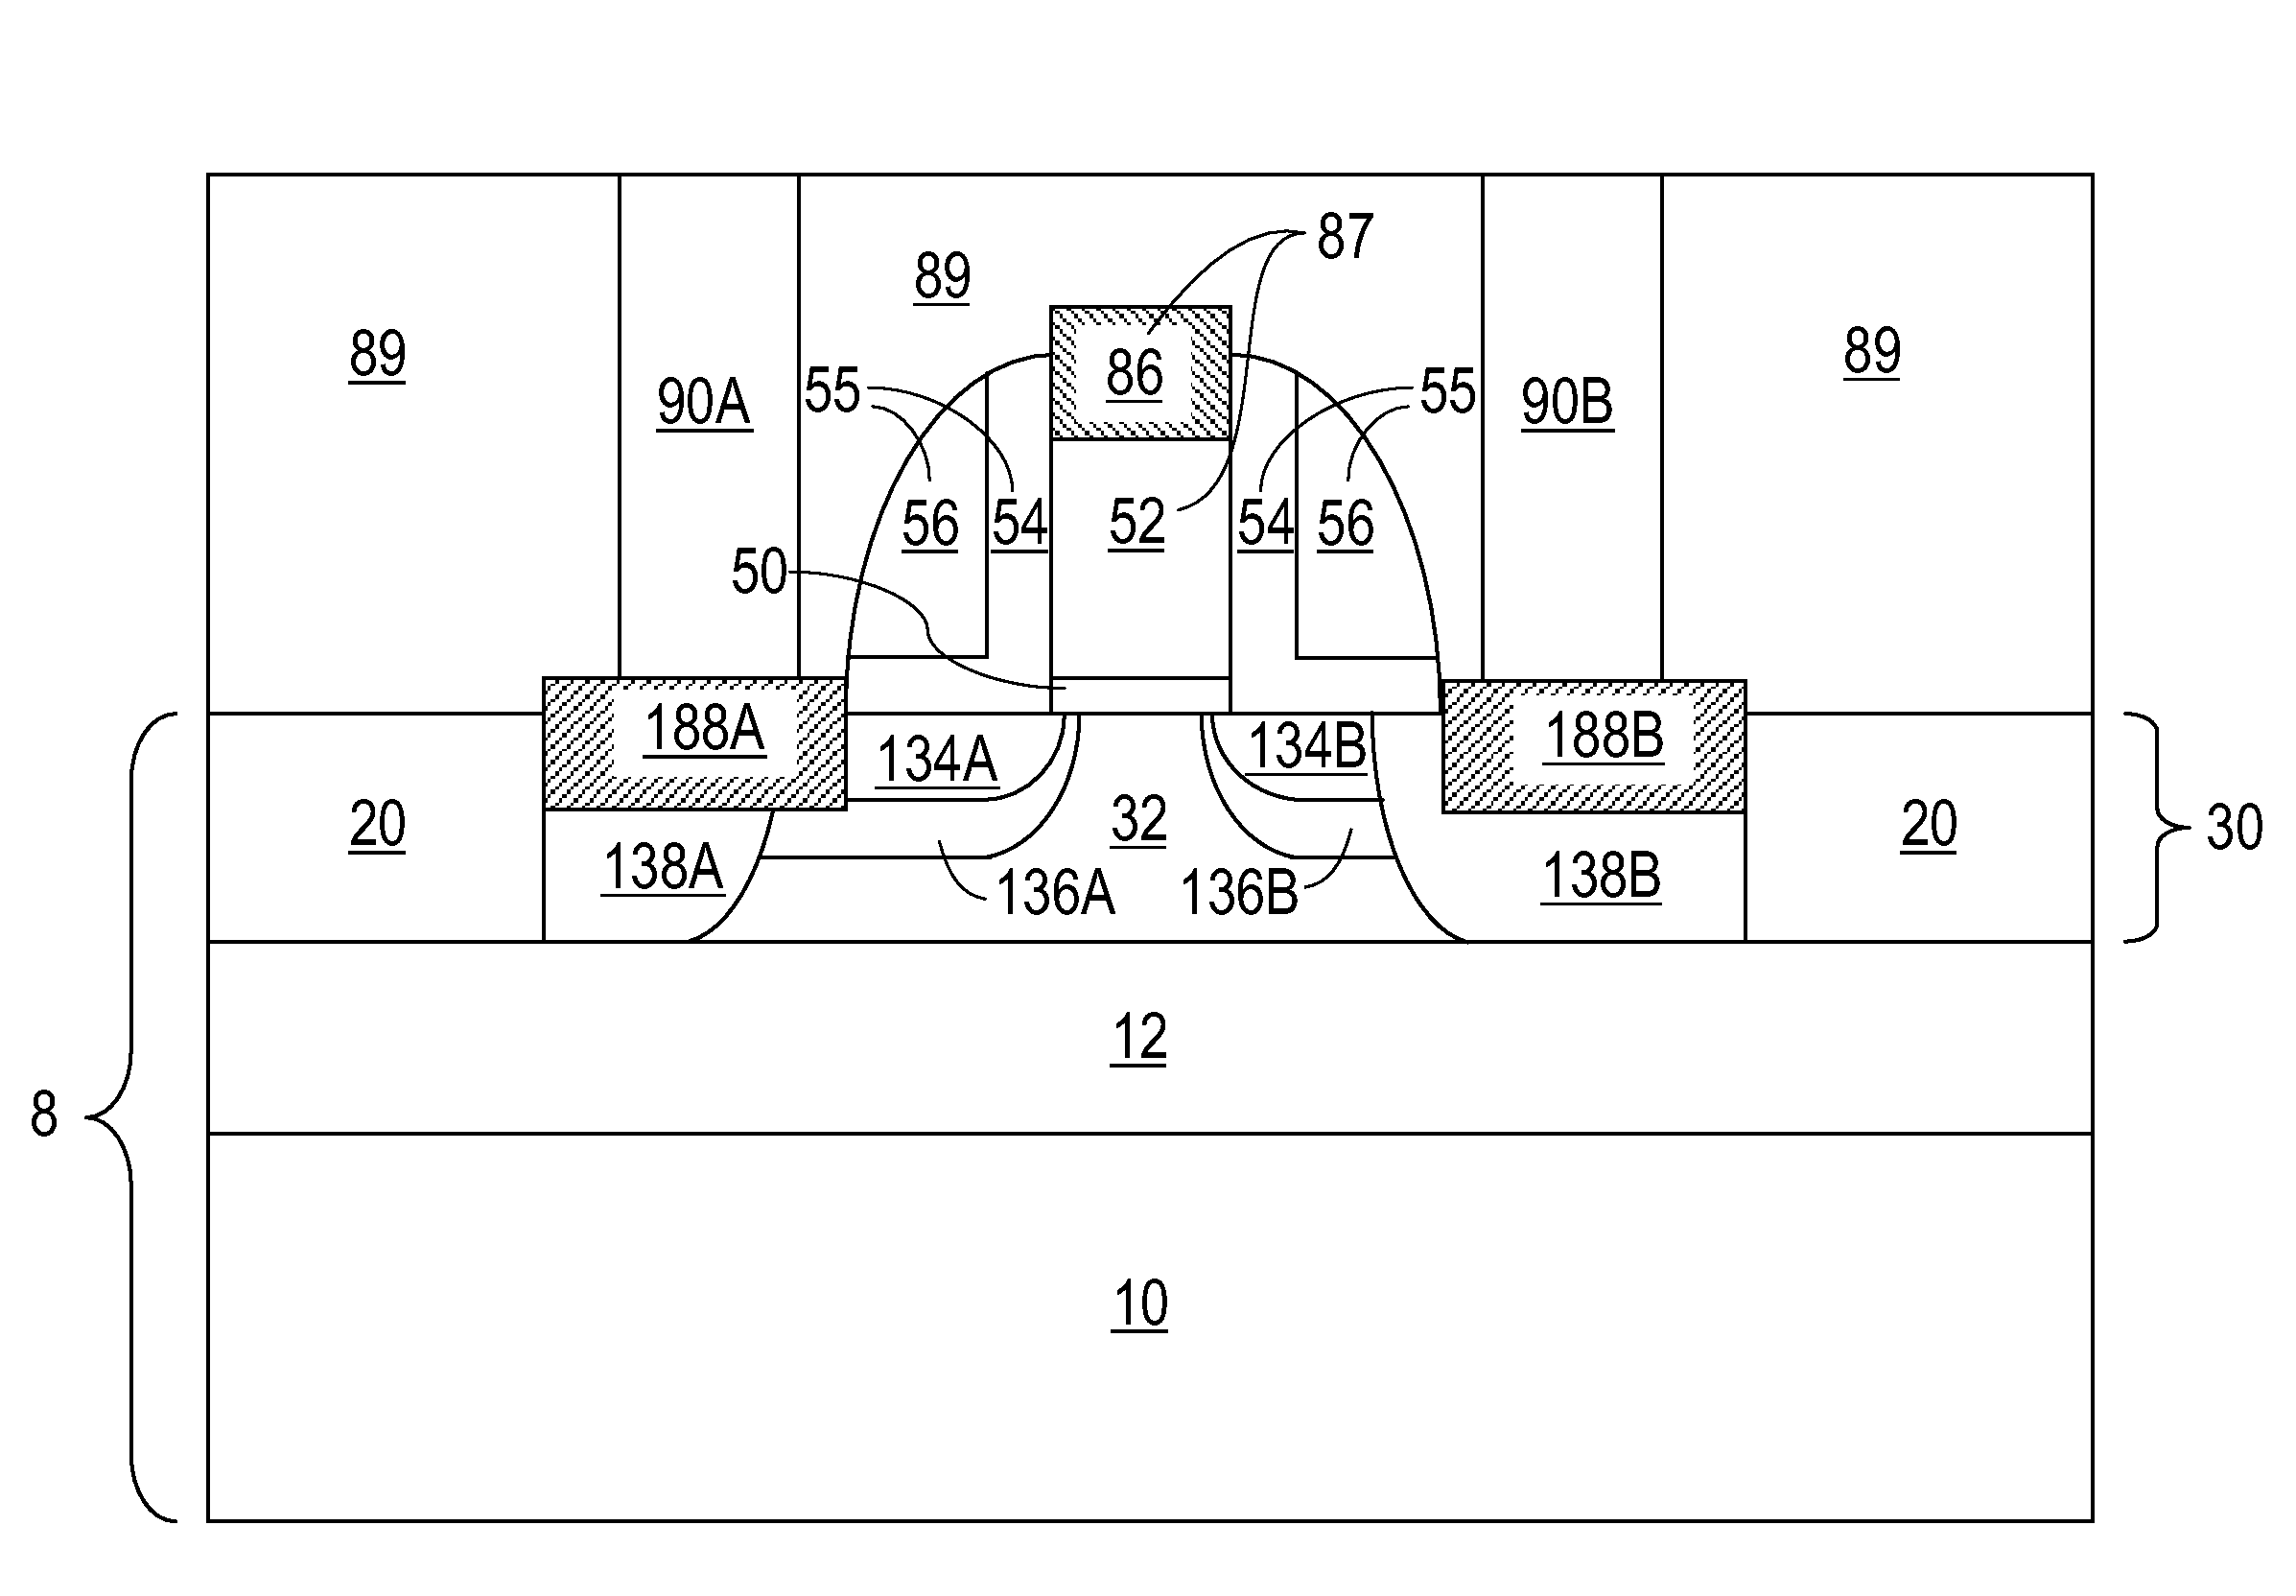 Partially depleted soi field effect transistor having a metallized source side halo region